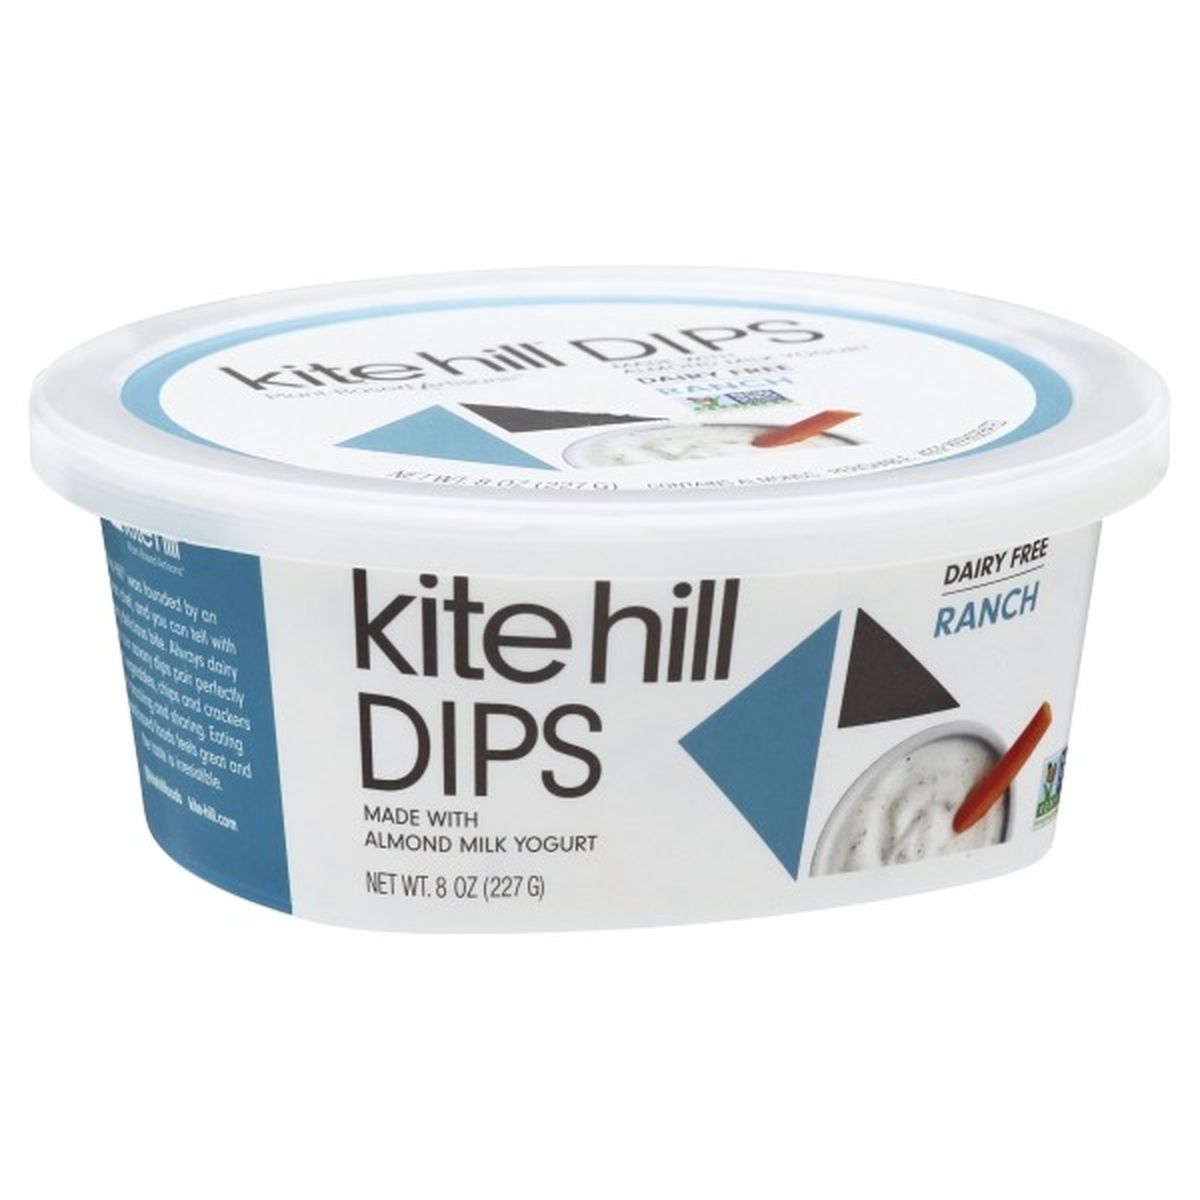 Calories in Kite Hill Dip, Dairy Free, Ranch